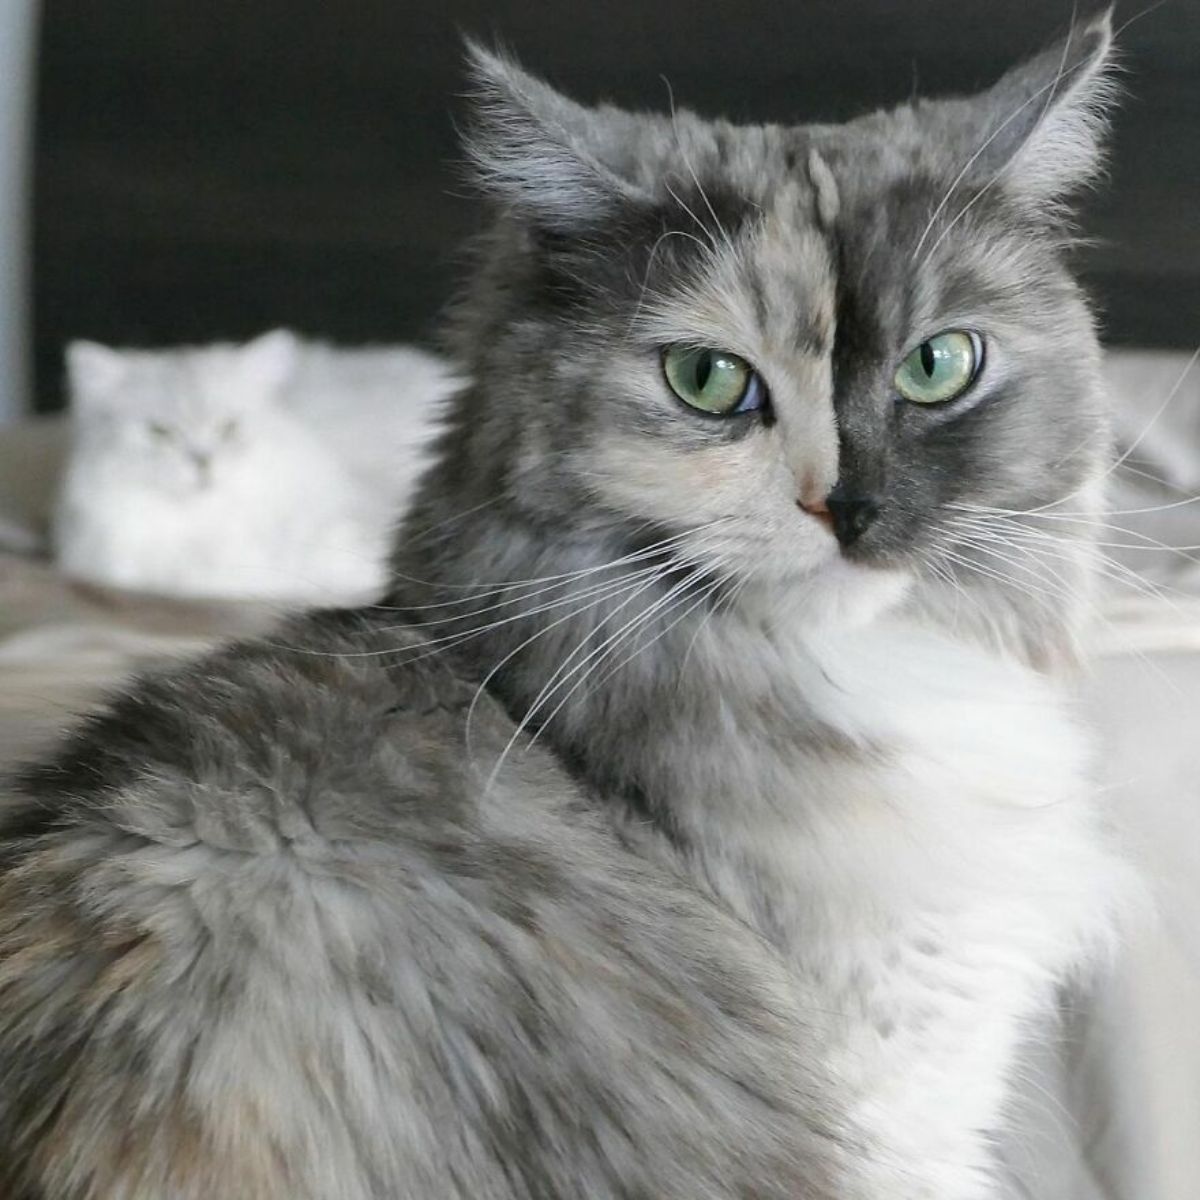 fluffy cat with right side of face being grey and left side being black laying on bed with a white cat behind her